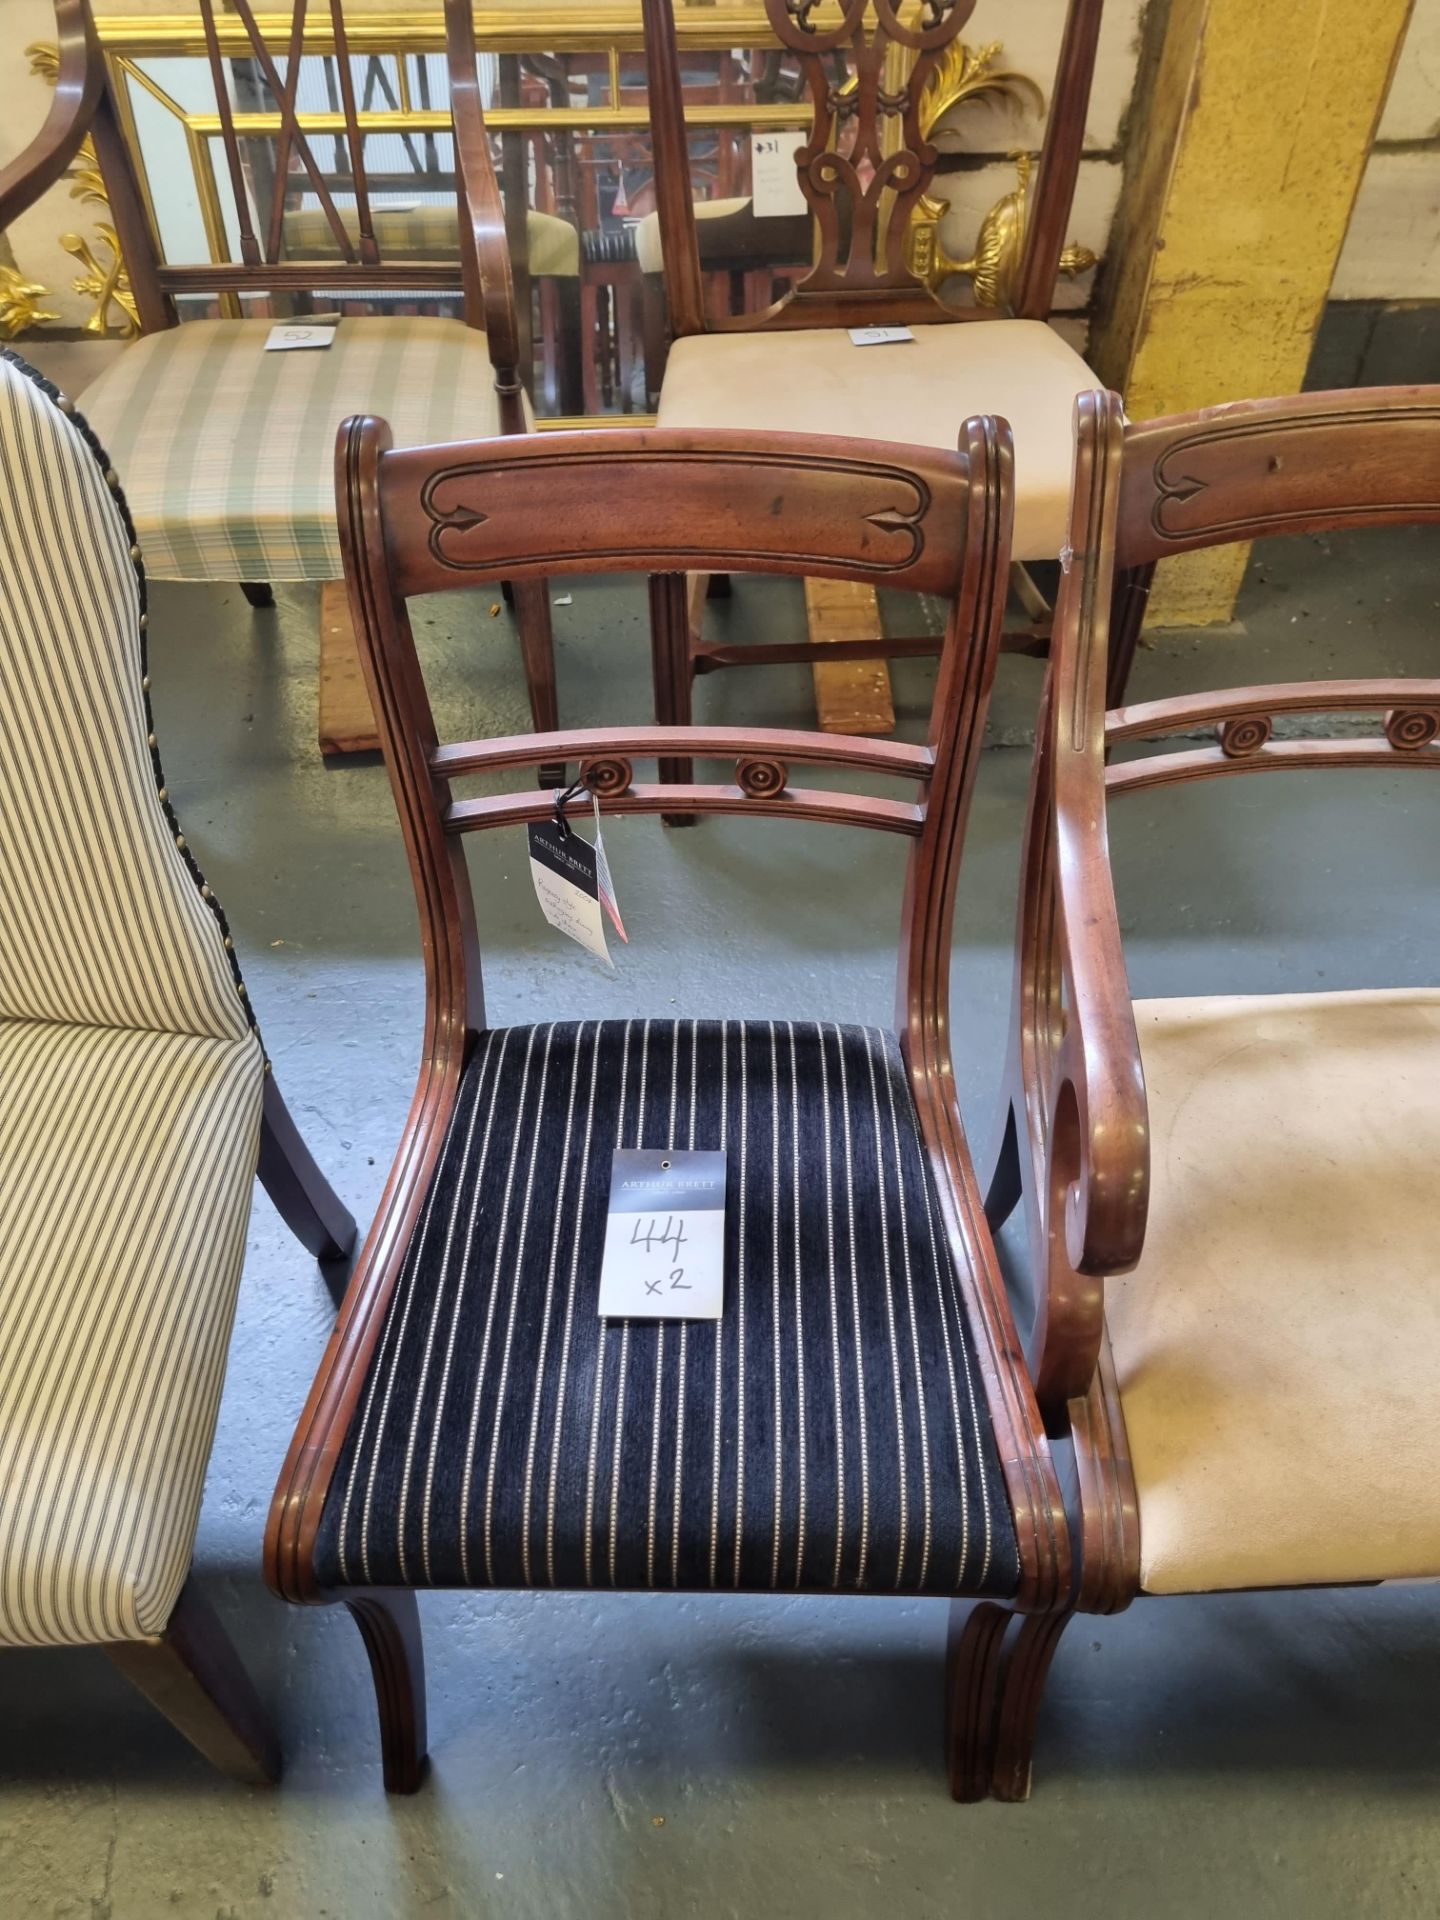 2 X Arthur Brett Regency-Style Mahogany Dining Chairs Upholstered On Sabre Legs With Drop In Seat, - Image 3 of 3